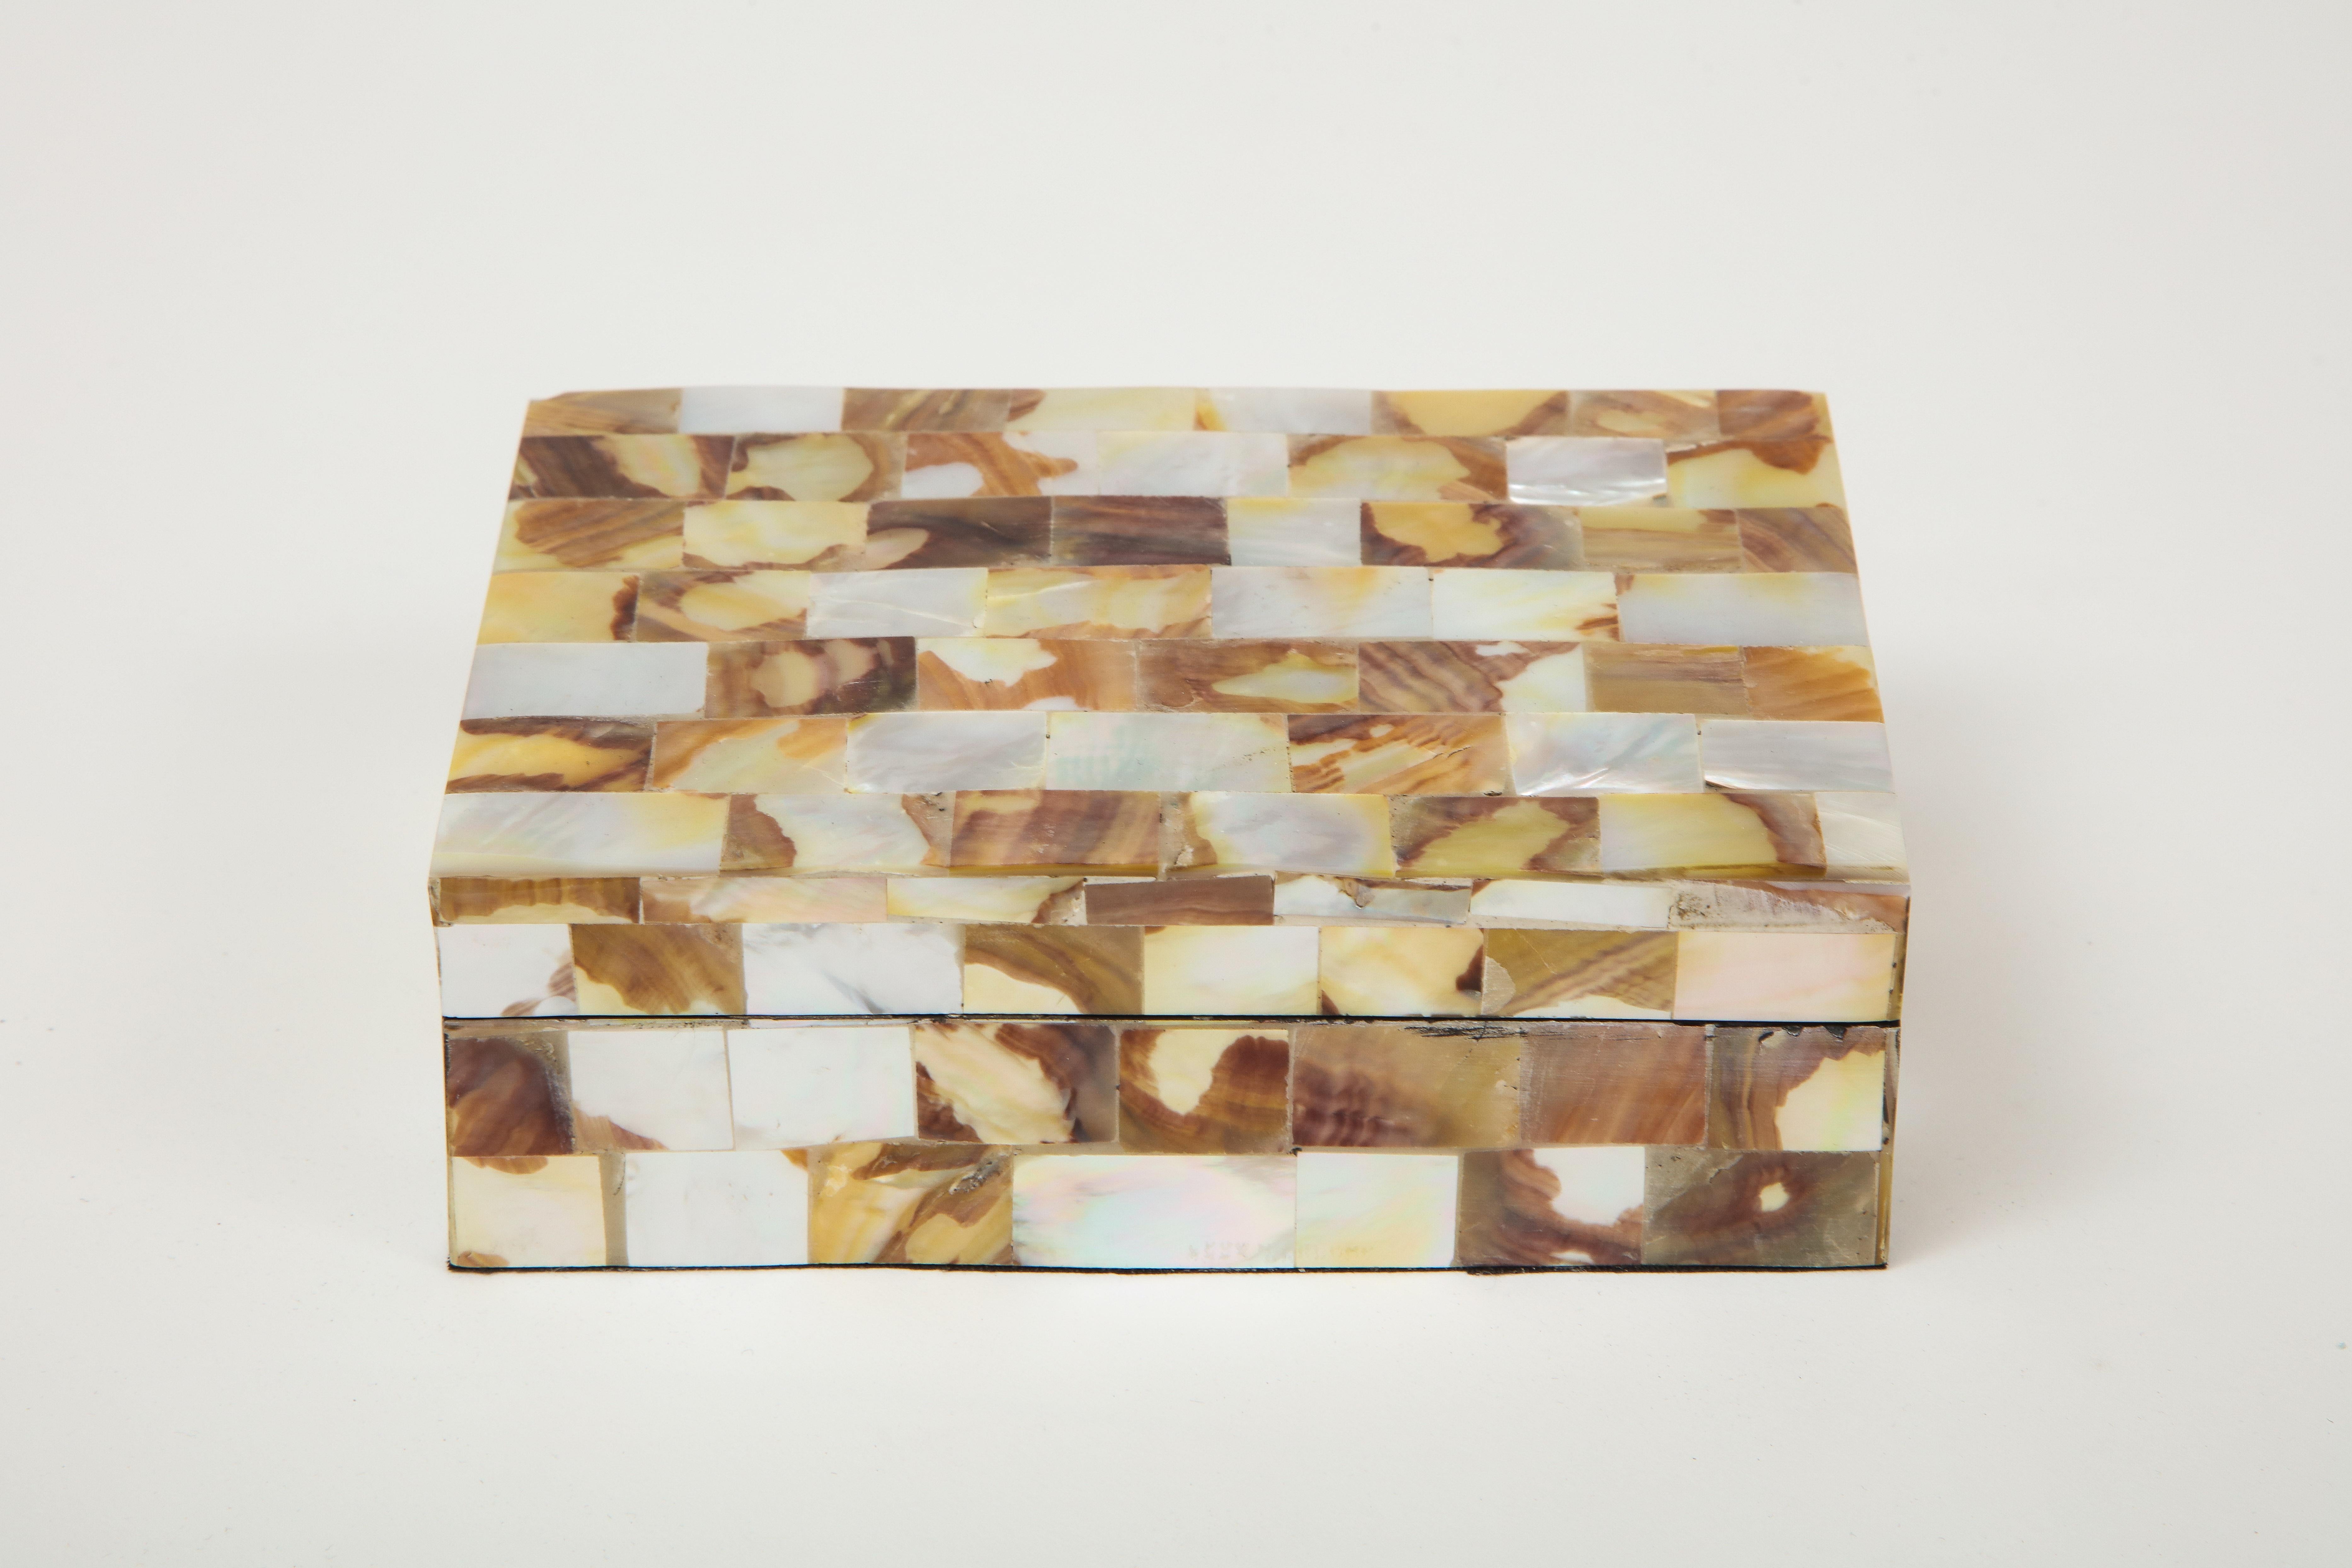 Decorative box with hand inlaid mother of pearl shell rectangular tiles.